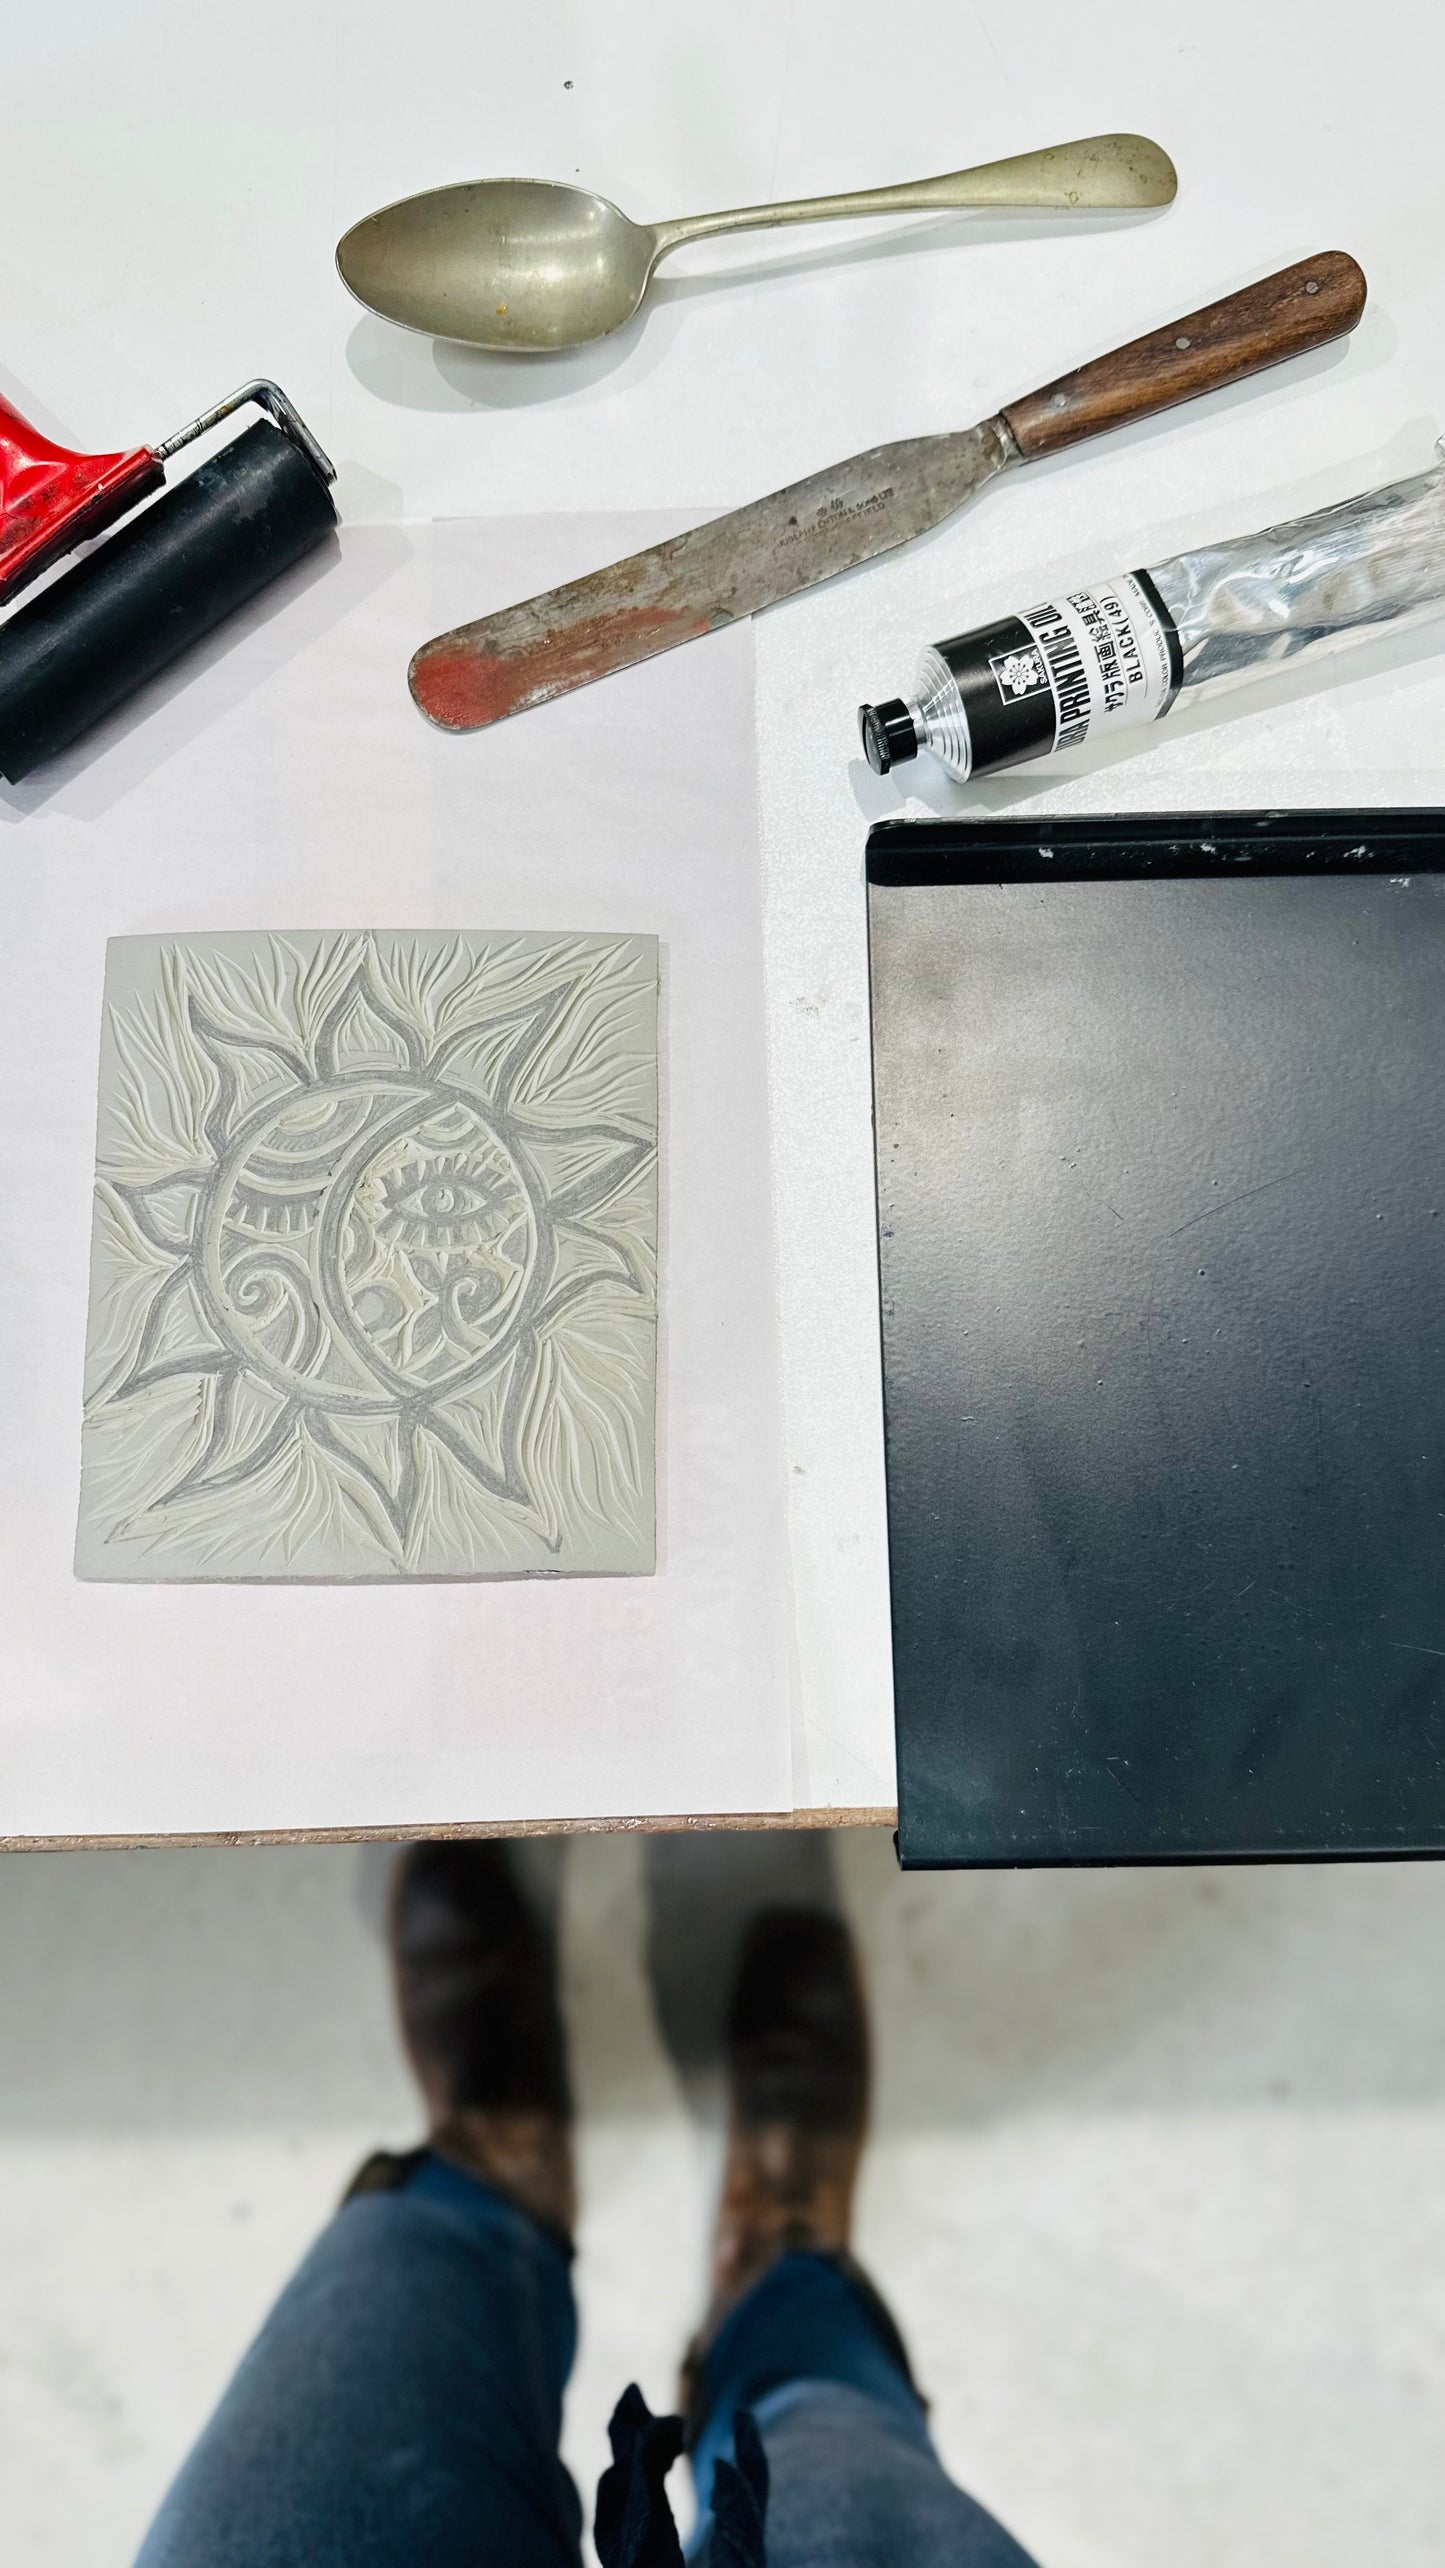 Introductory Printmaking - celestial lino prints. Sunday 2nd June 9:30am - 12